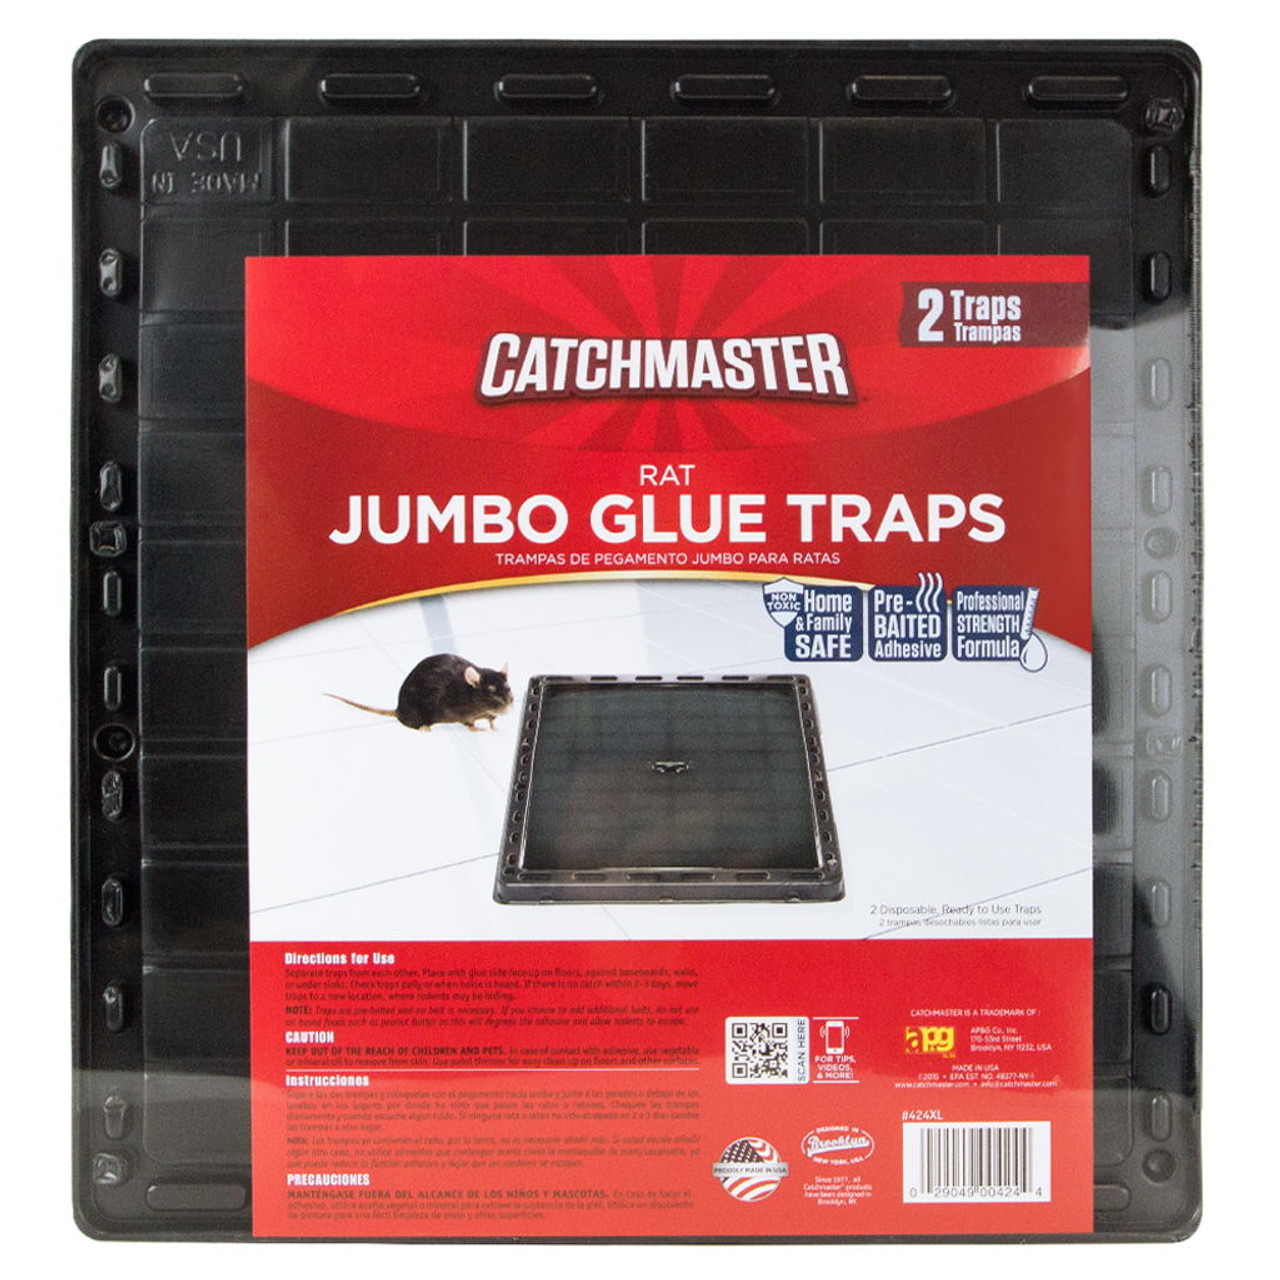 Catchmaster Glue Traps, Mouse & Insect - 4 traps